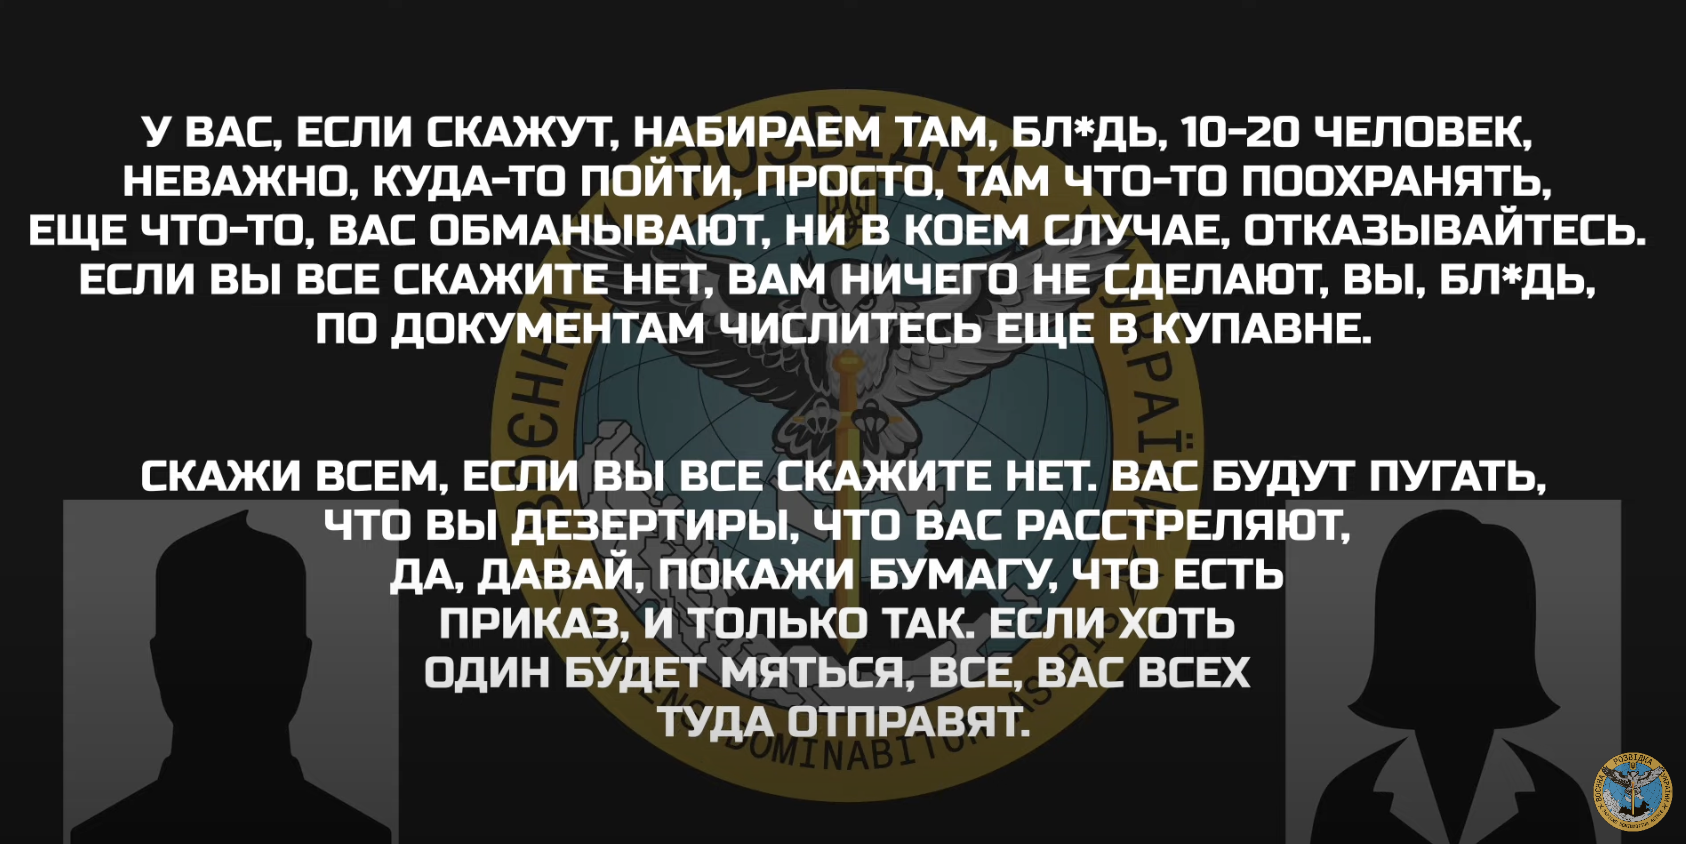 ''You are being deceived'': occupier's wife shared how Russian conscripts are sent to storms in Ukraine. Interception